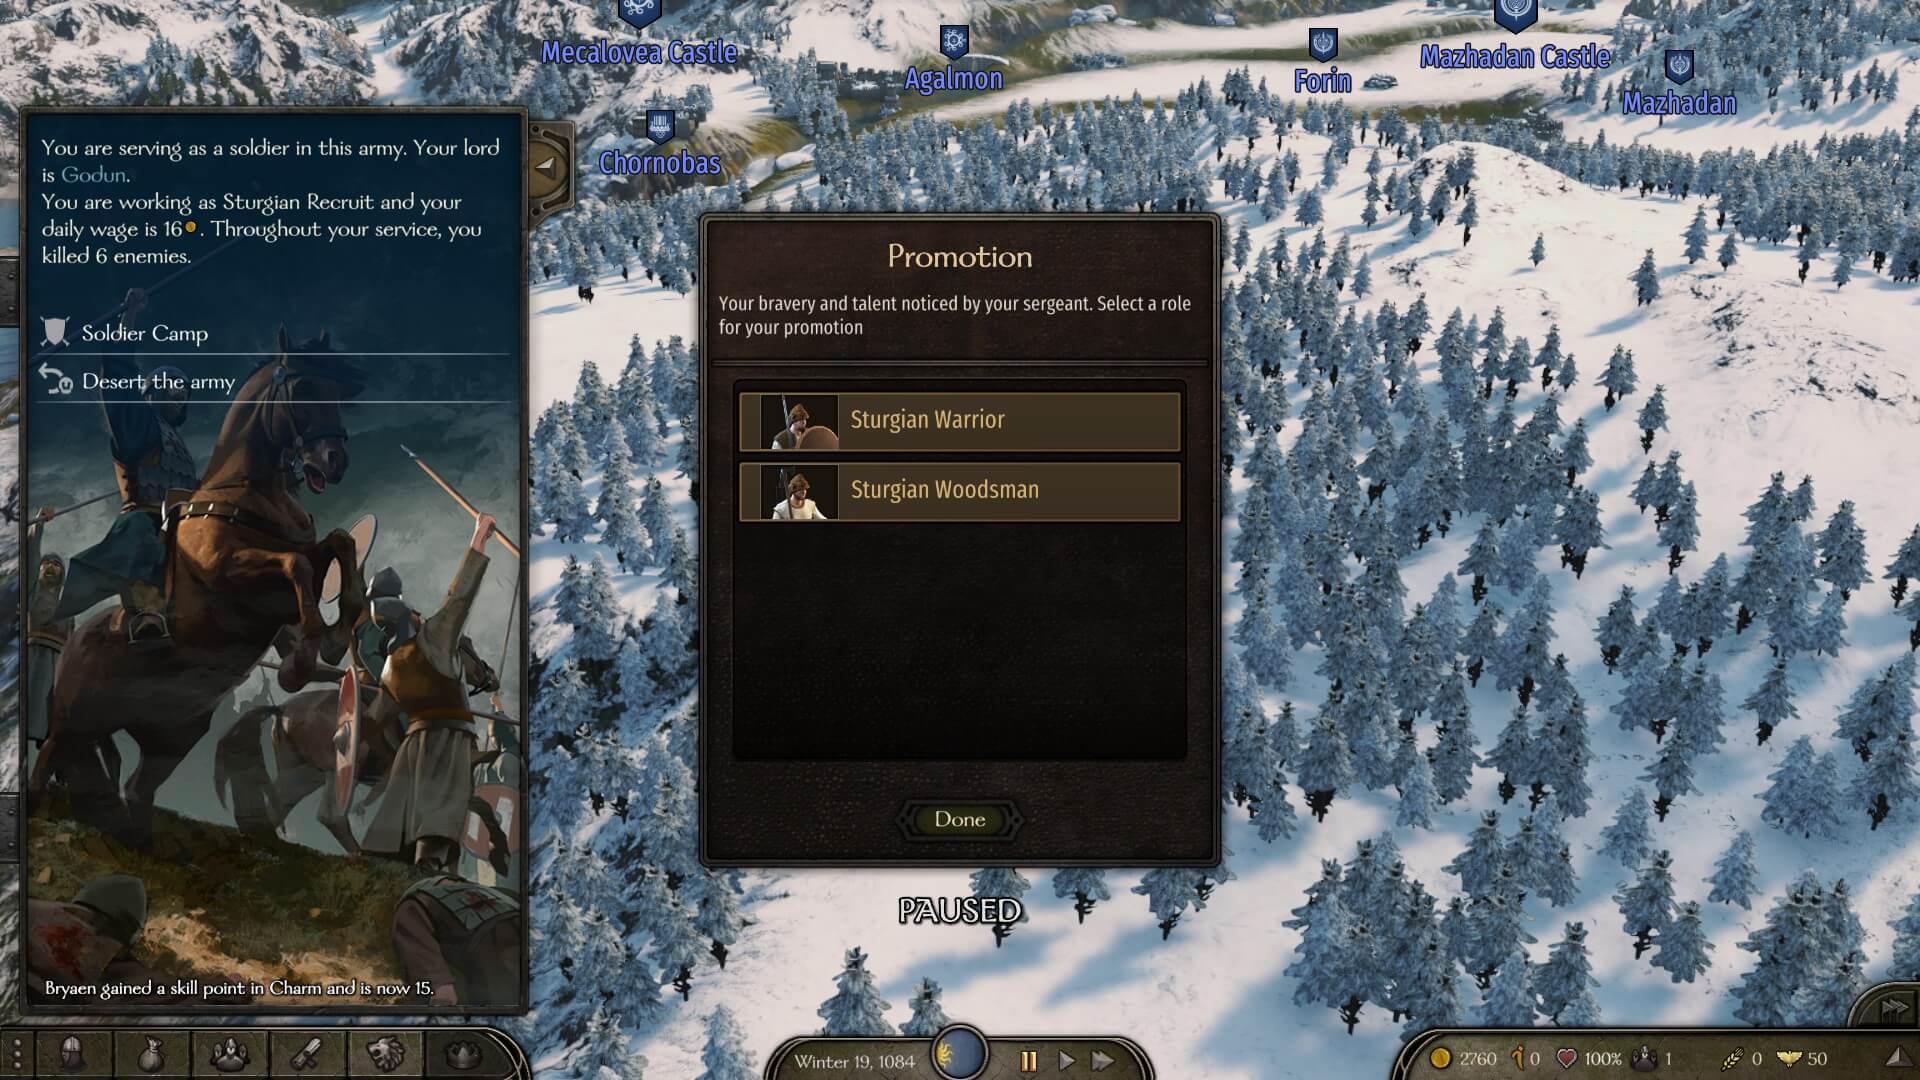 An opportunity for promotion in the Freelancer mod for Mount and Blade II.